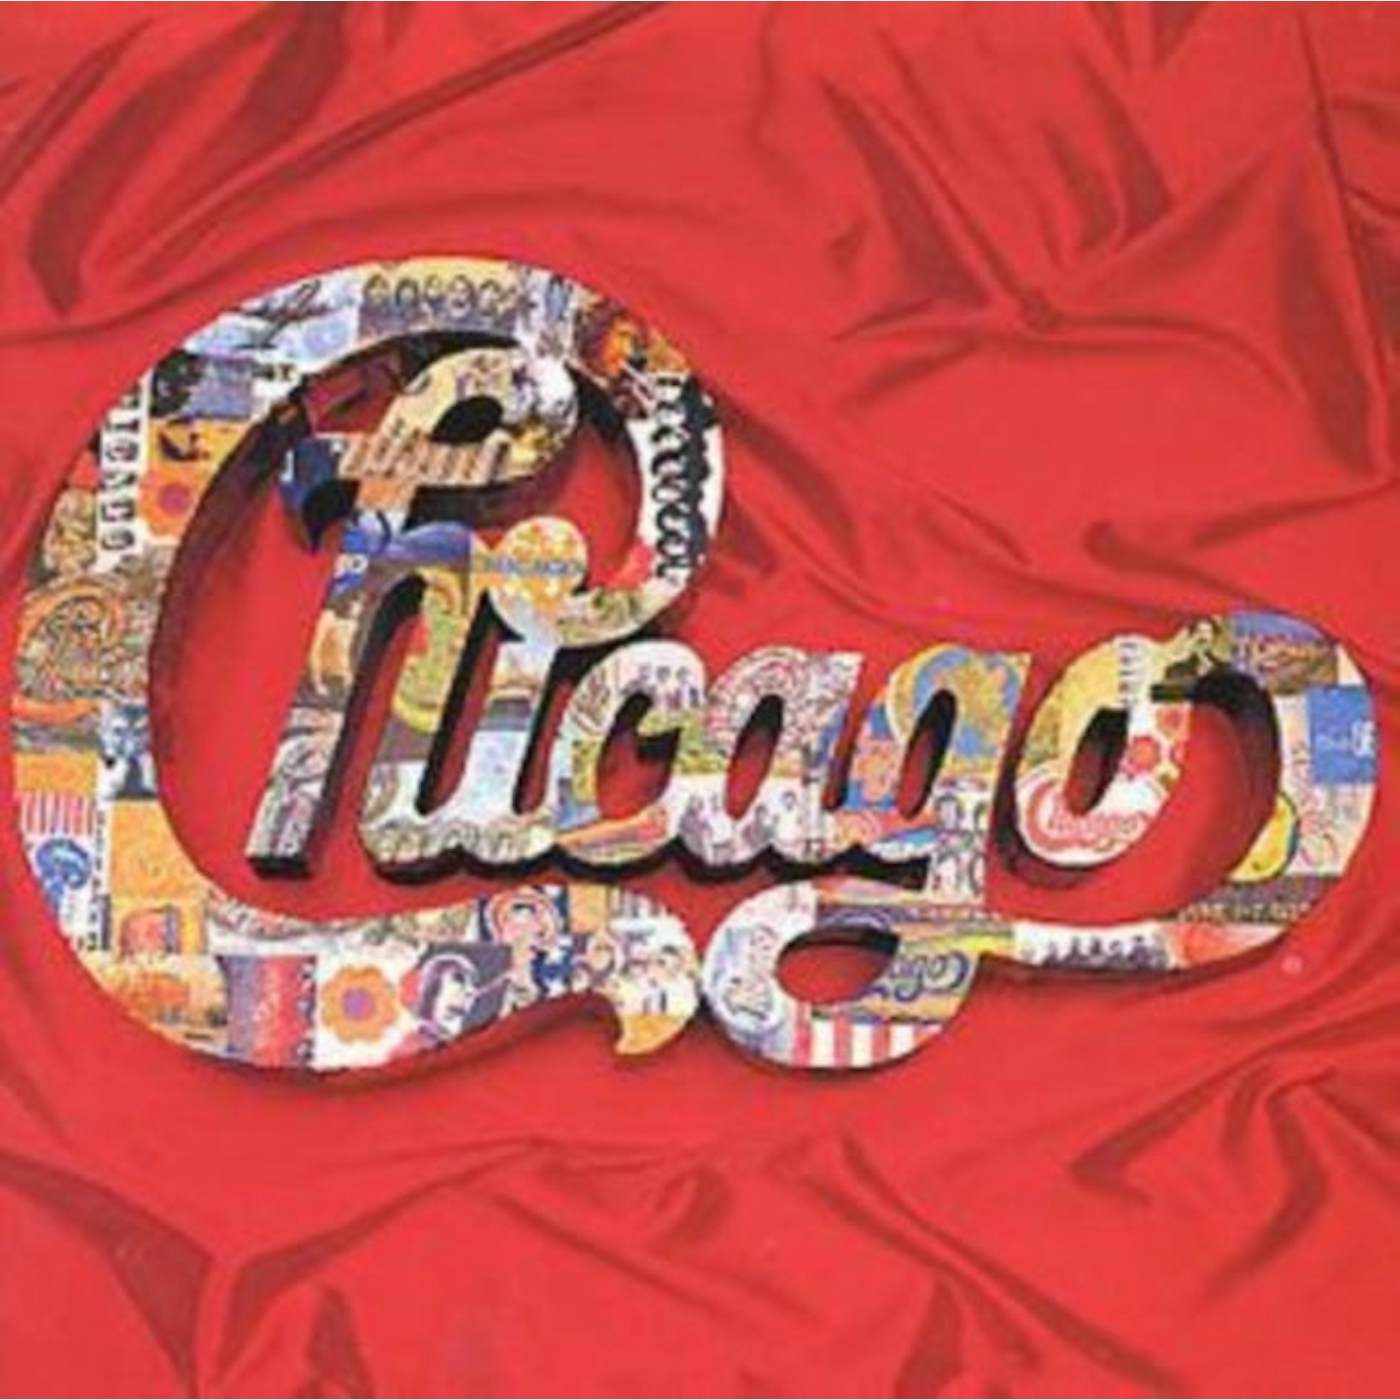 Chicago CD - The Heart Of - 19 67-19 97